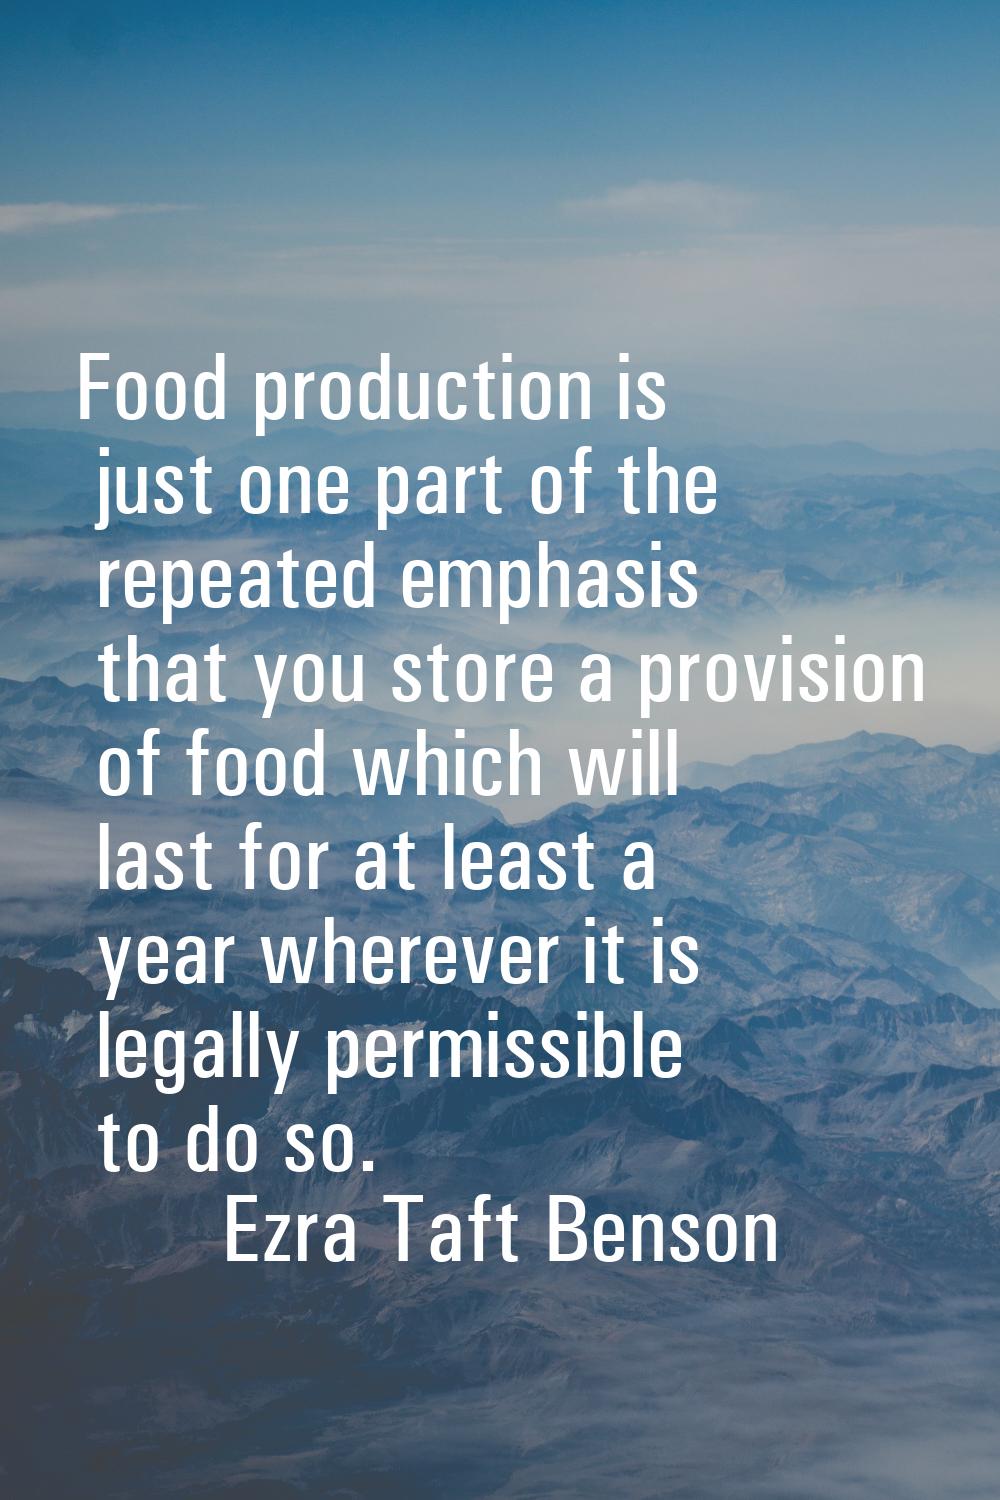 Food production is just one part of the repeated emphasis that you store a provision of food which 